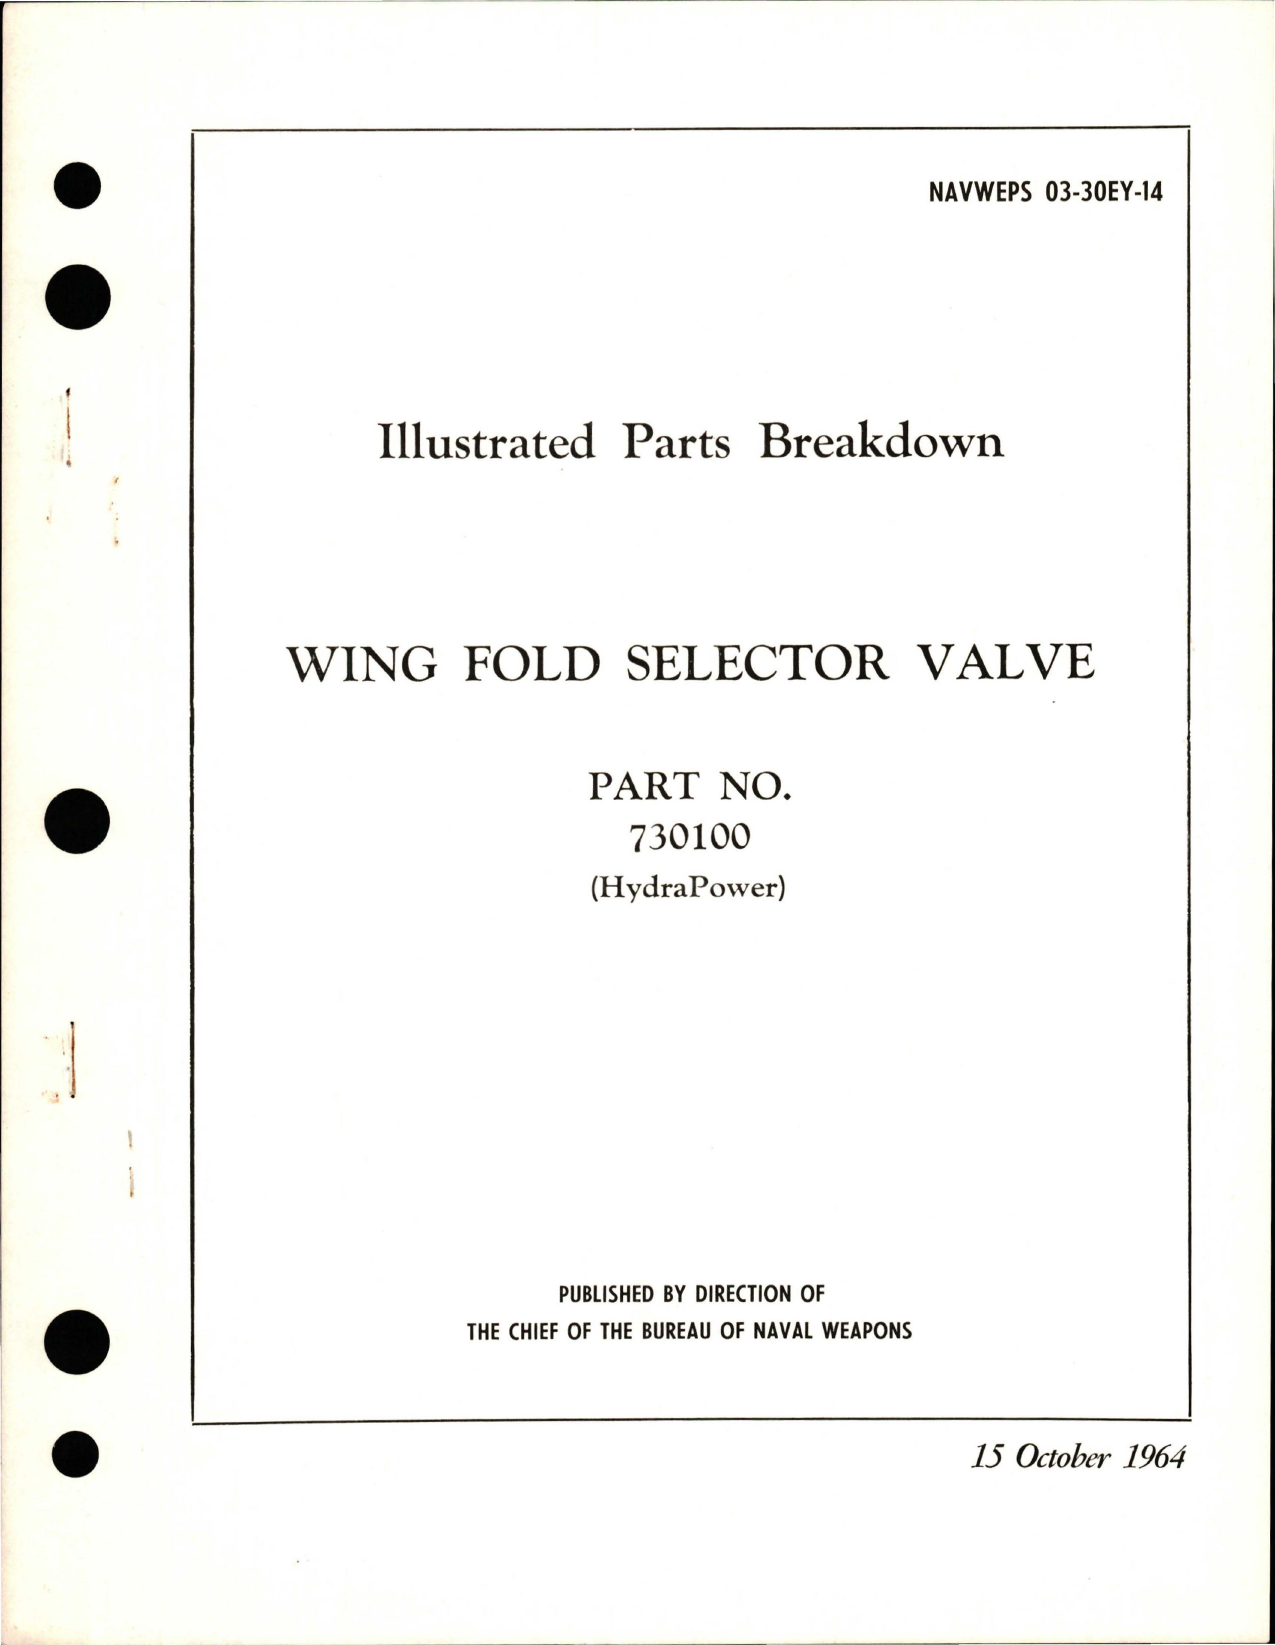 Sample page 1 from AirCorps Library document: Illustrated Parts Breakdown for Wing Fold Selector Valve - Part 730100